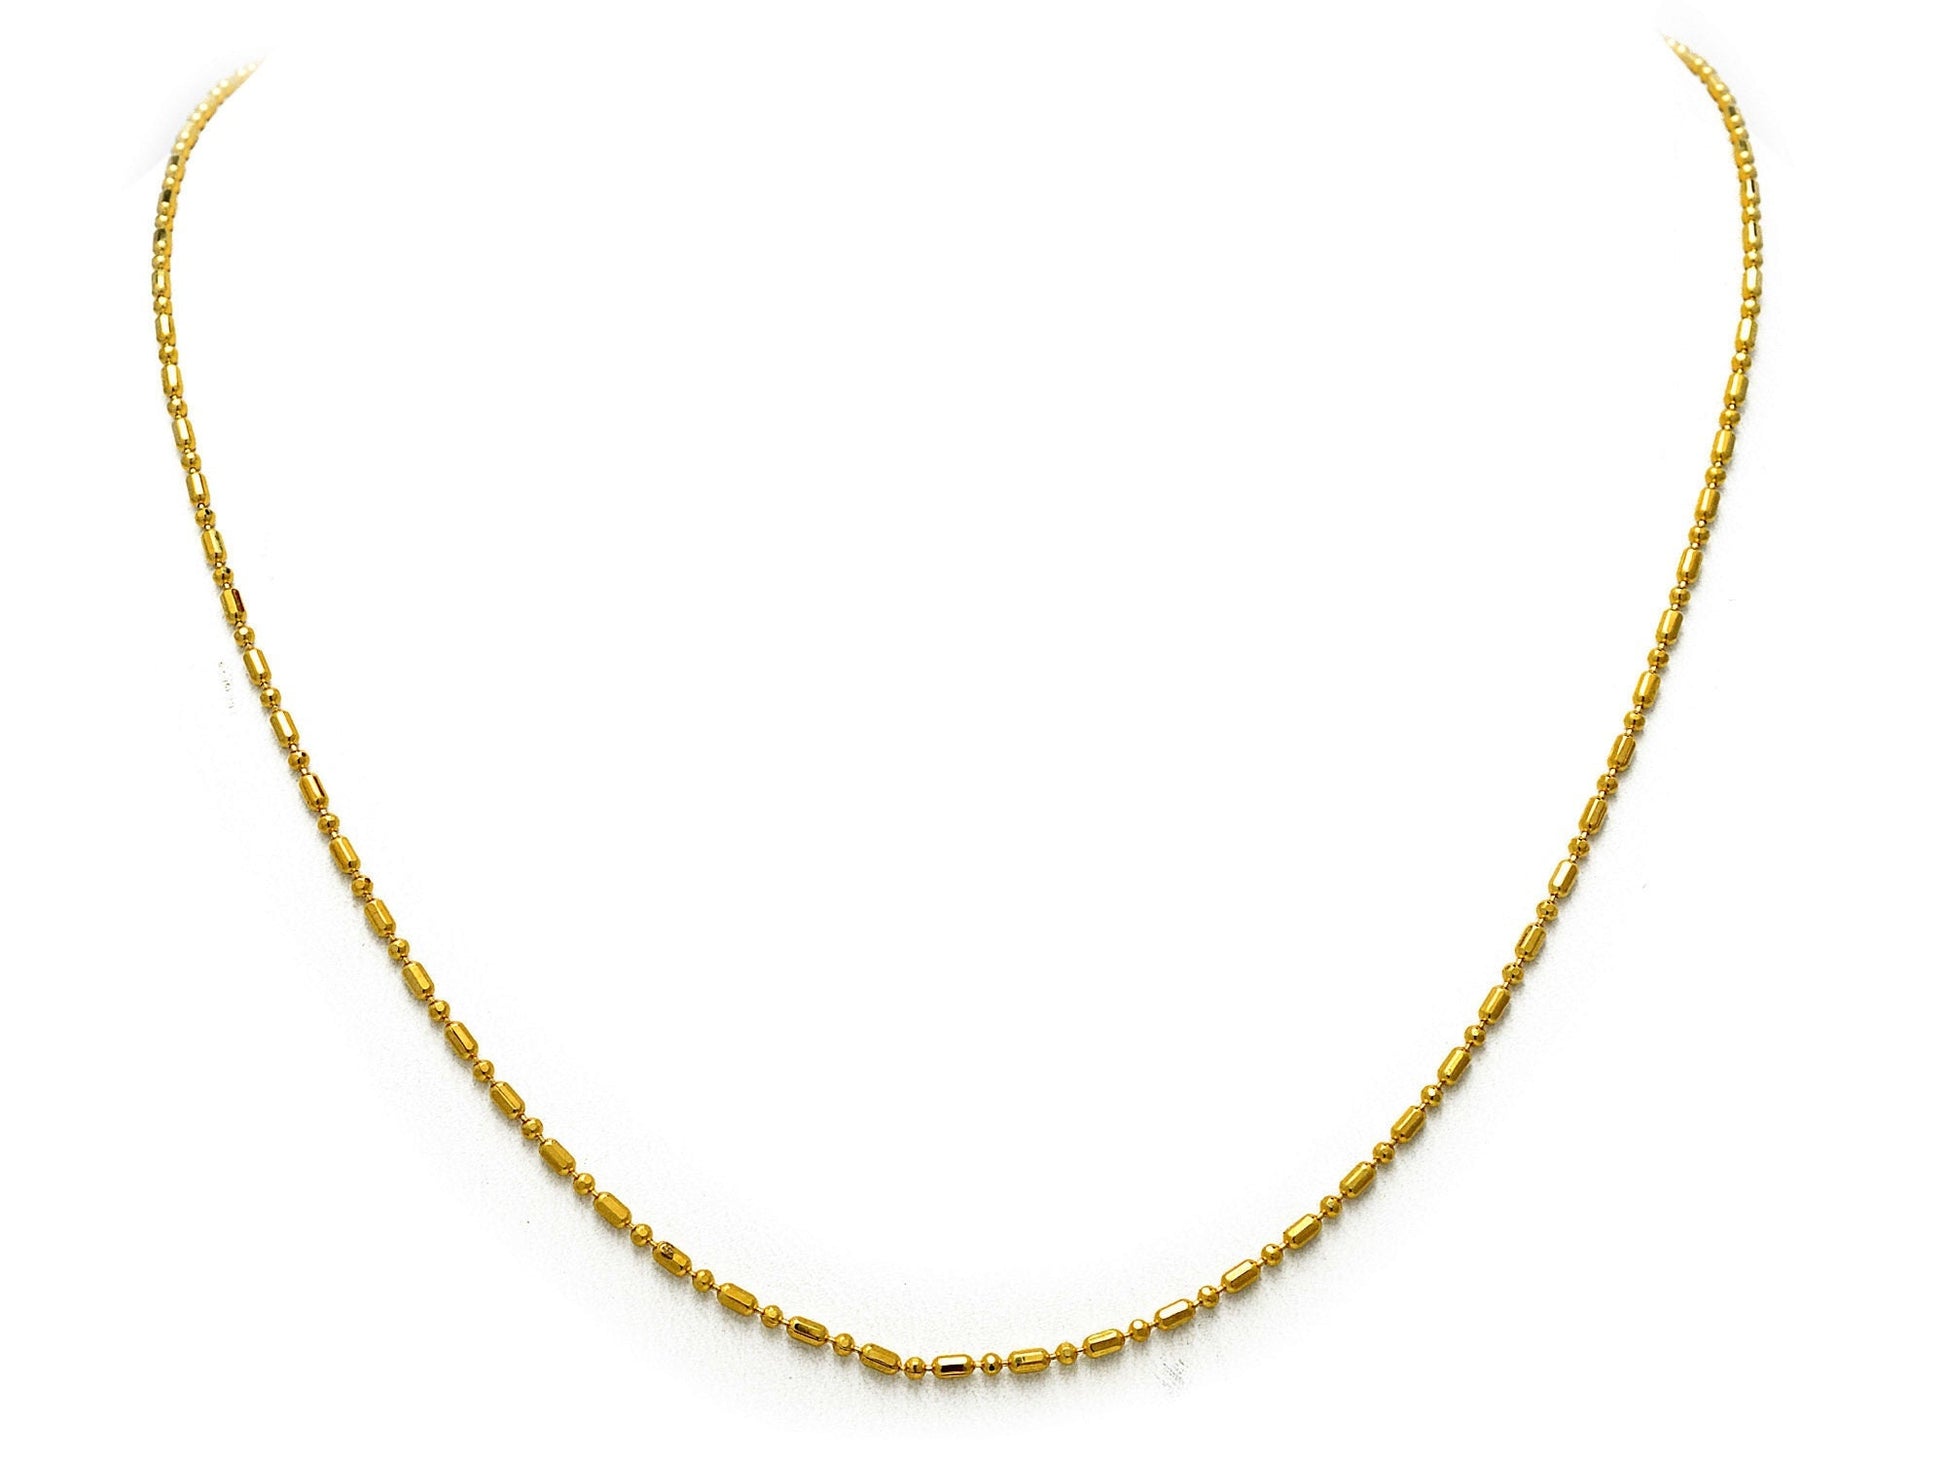 Beaded ball gold filled EP tarnish resistant chain 18kt /18" inches long/1.50mm thickness for jewelry making item #cg386-1